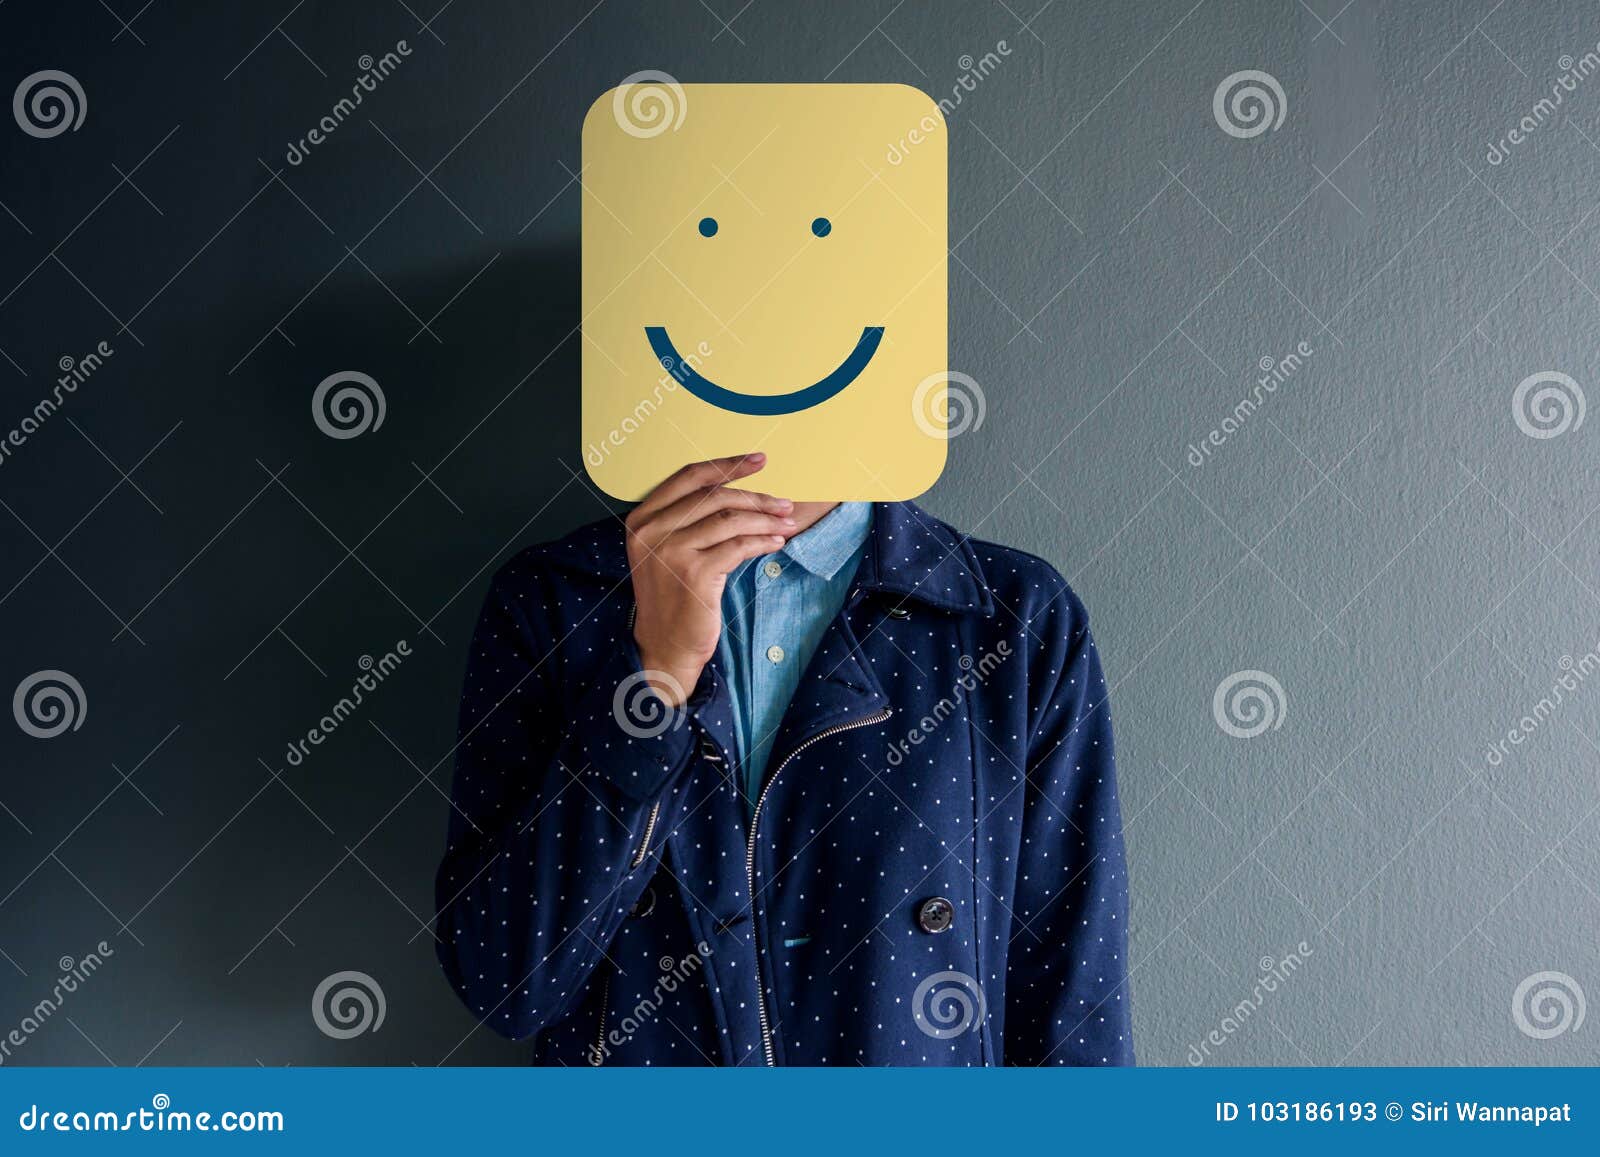 customer experience concept, portrait of client with happy face